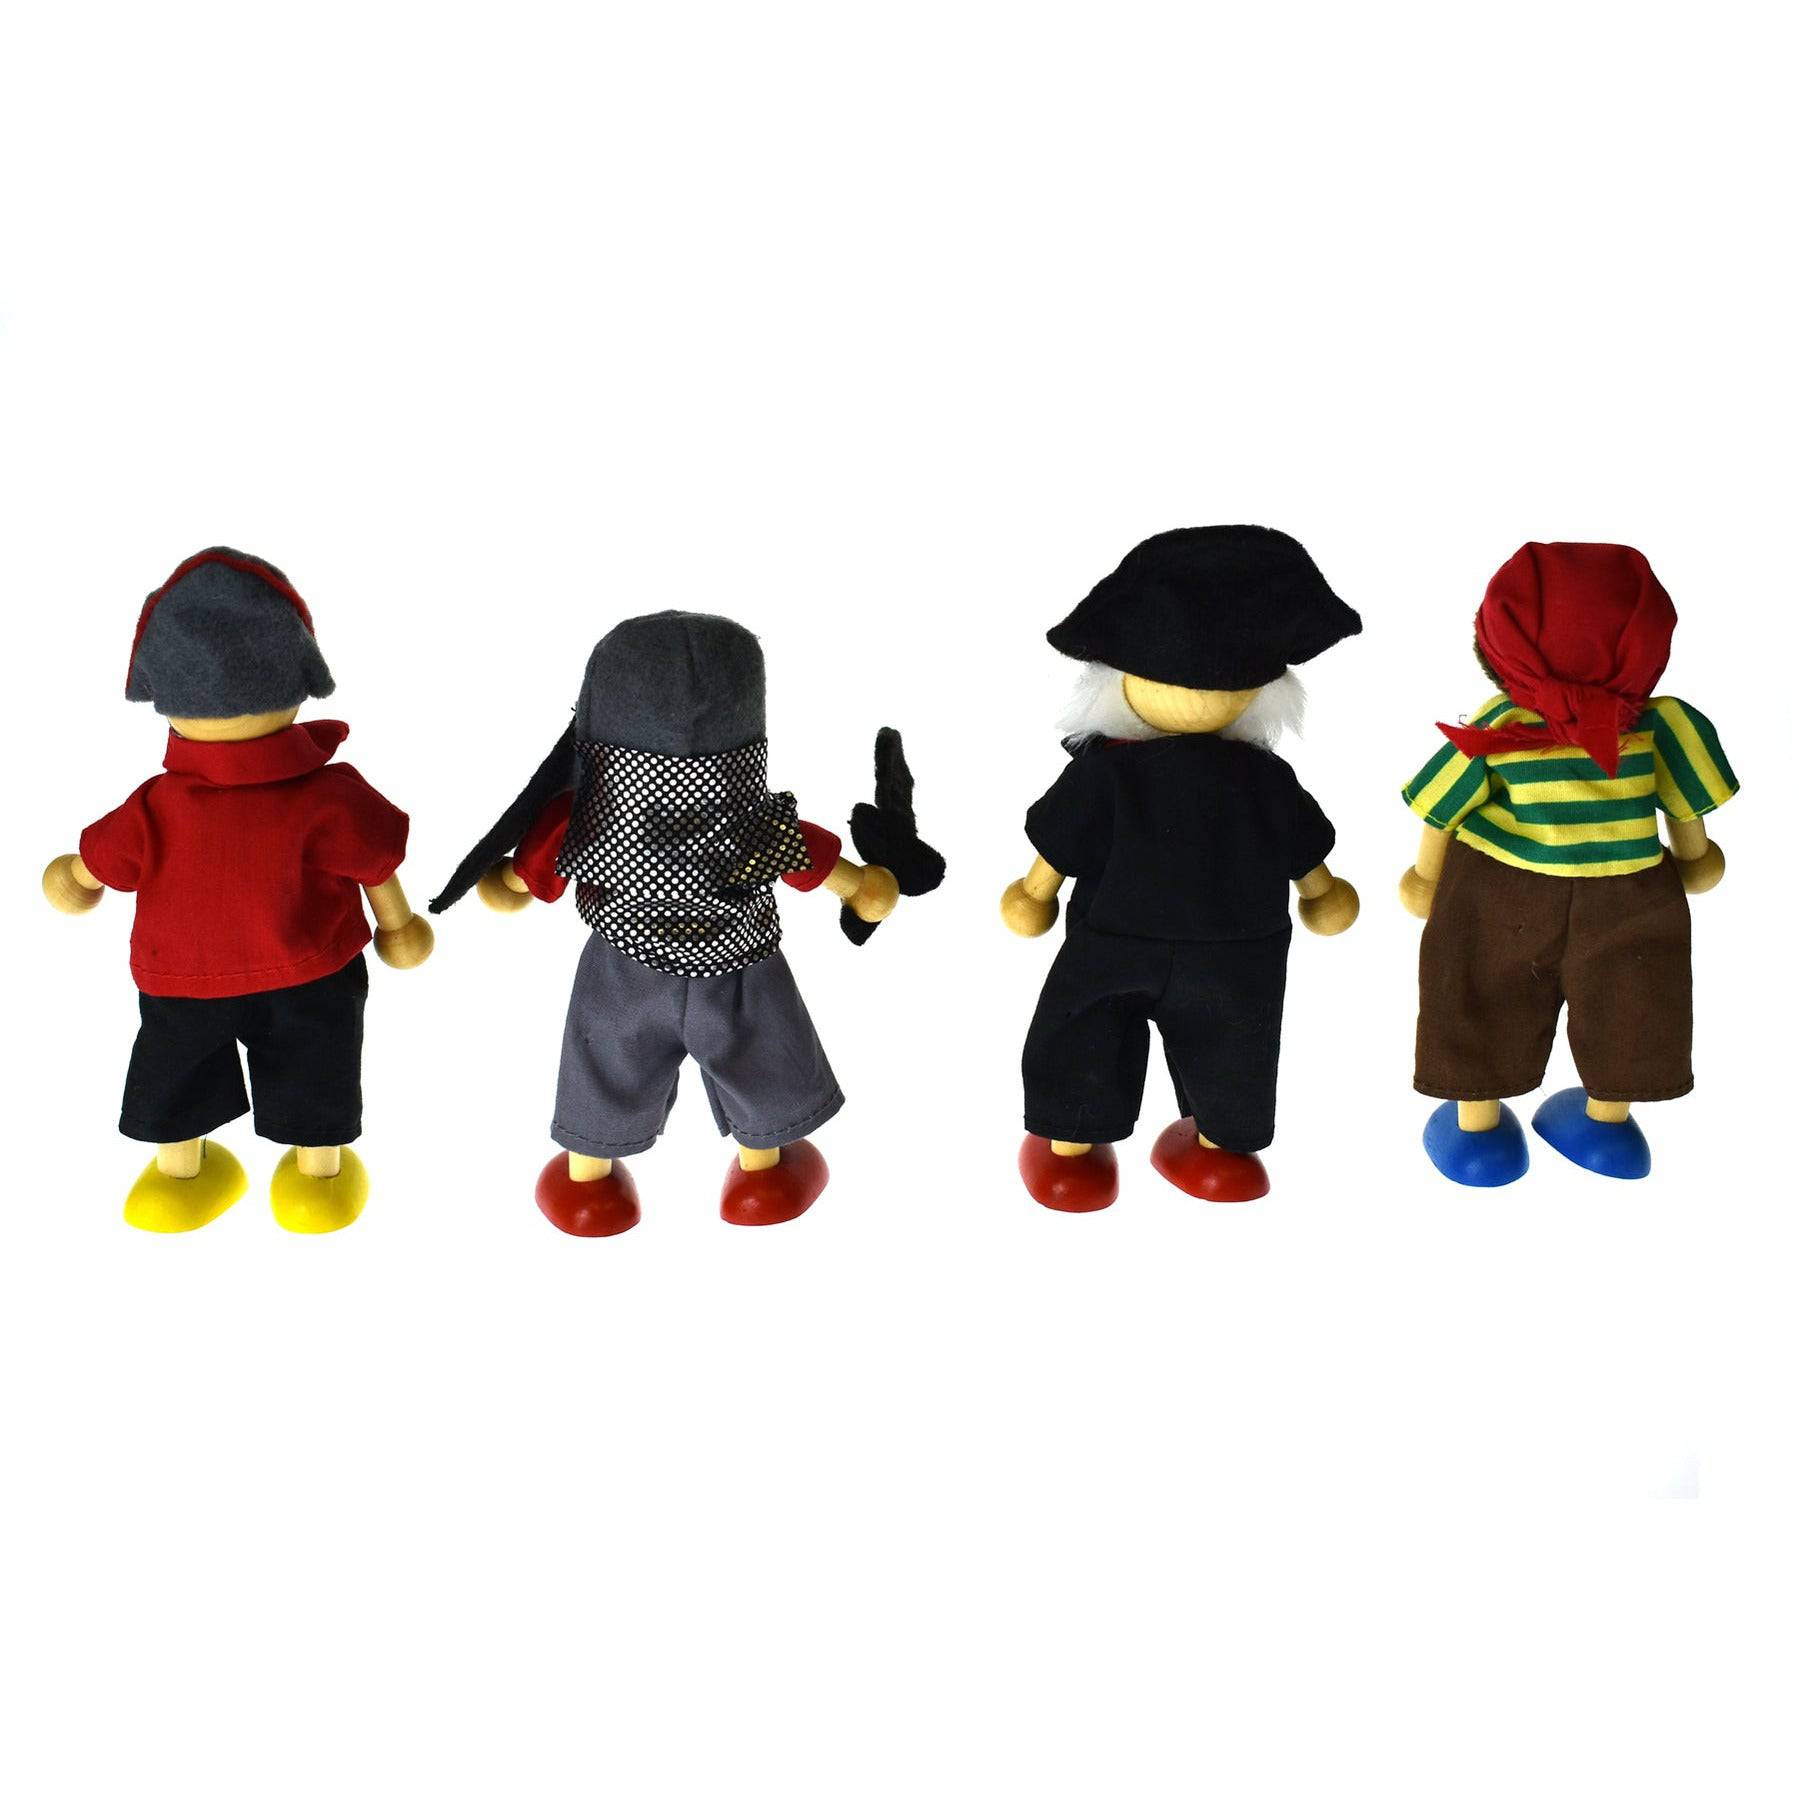 Price For 4 Assorted Pirate Flexi Doll - Sensory Circle